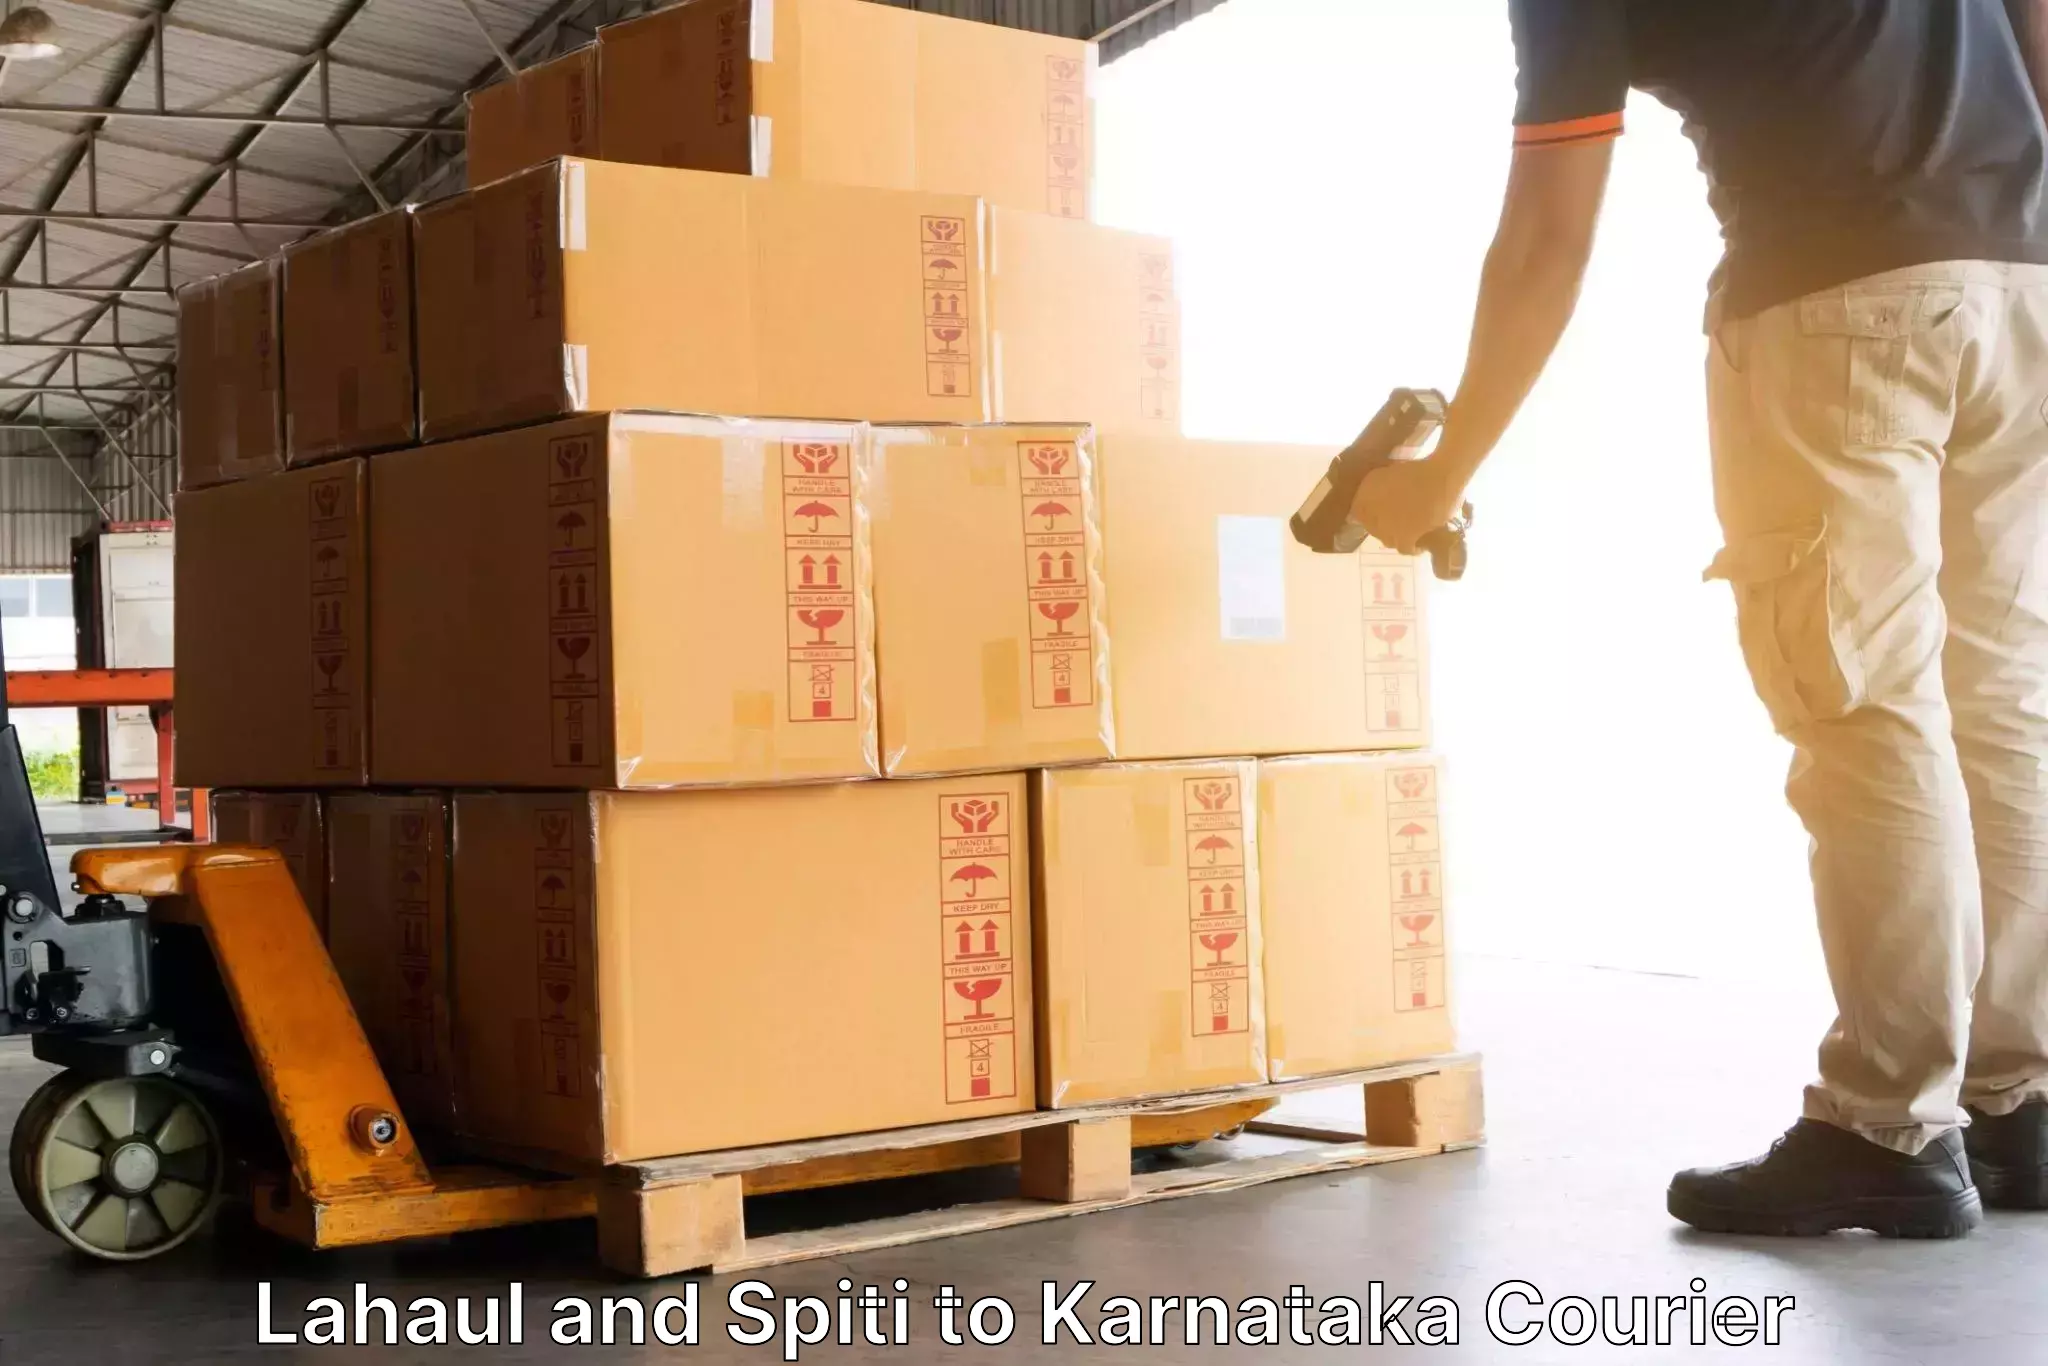 Speedy delivery service Lahaul and Spiti to Mangalore Port